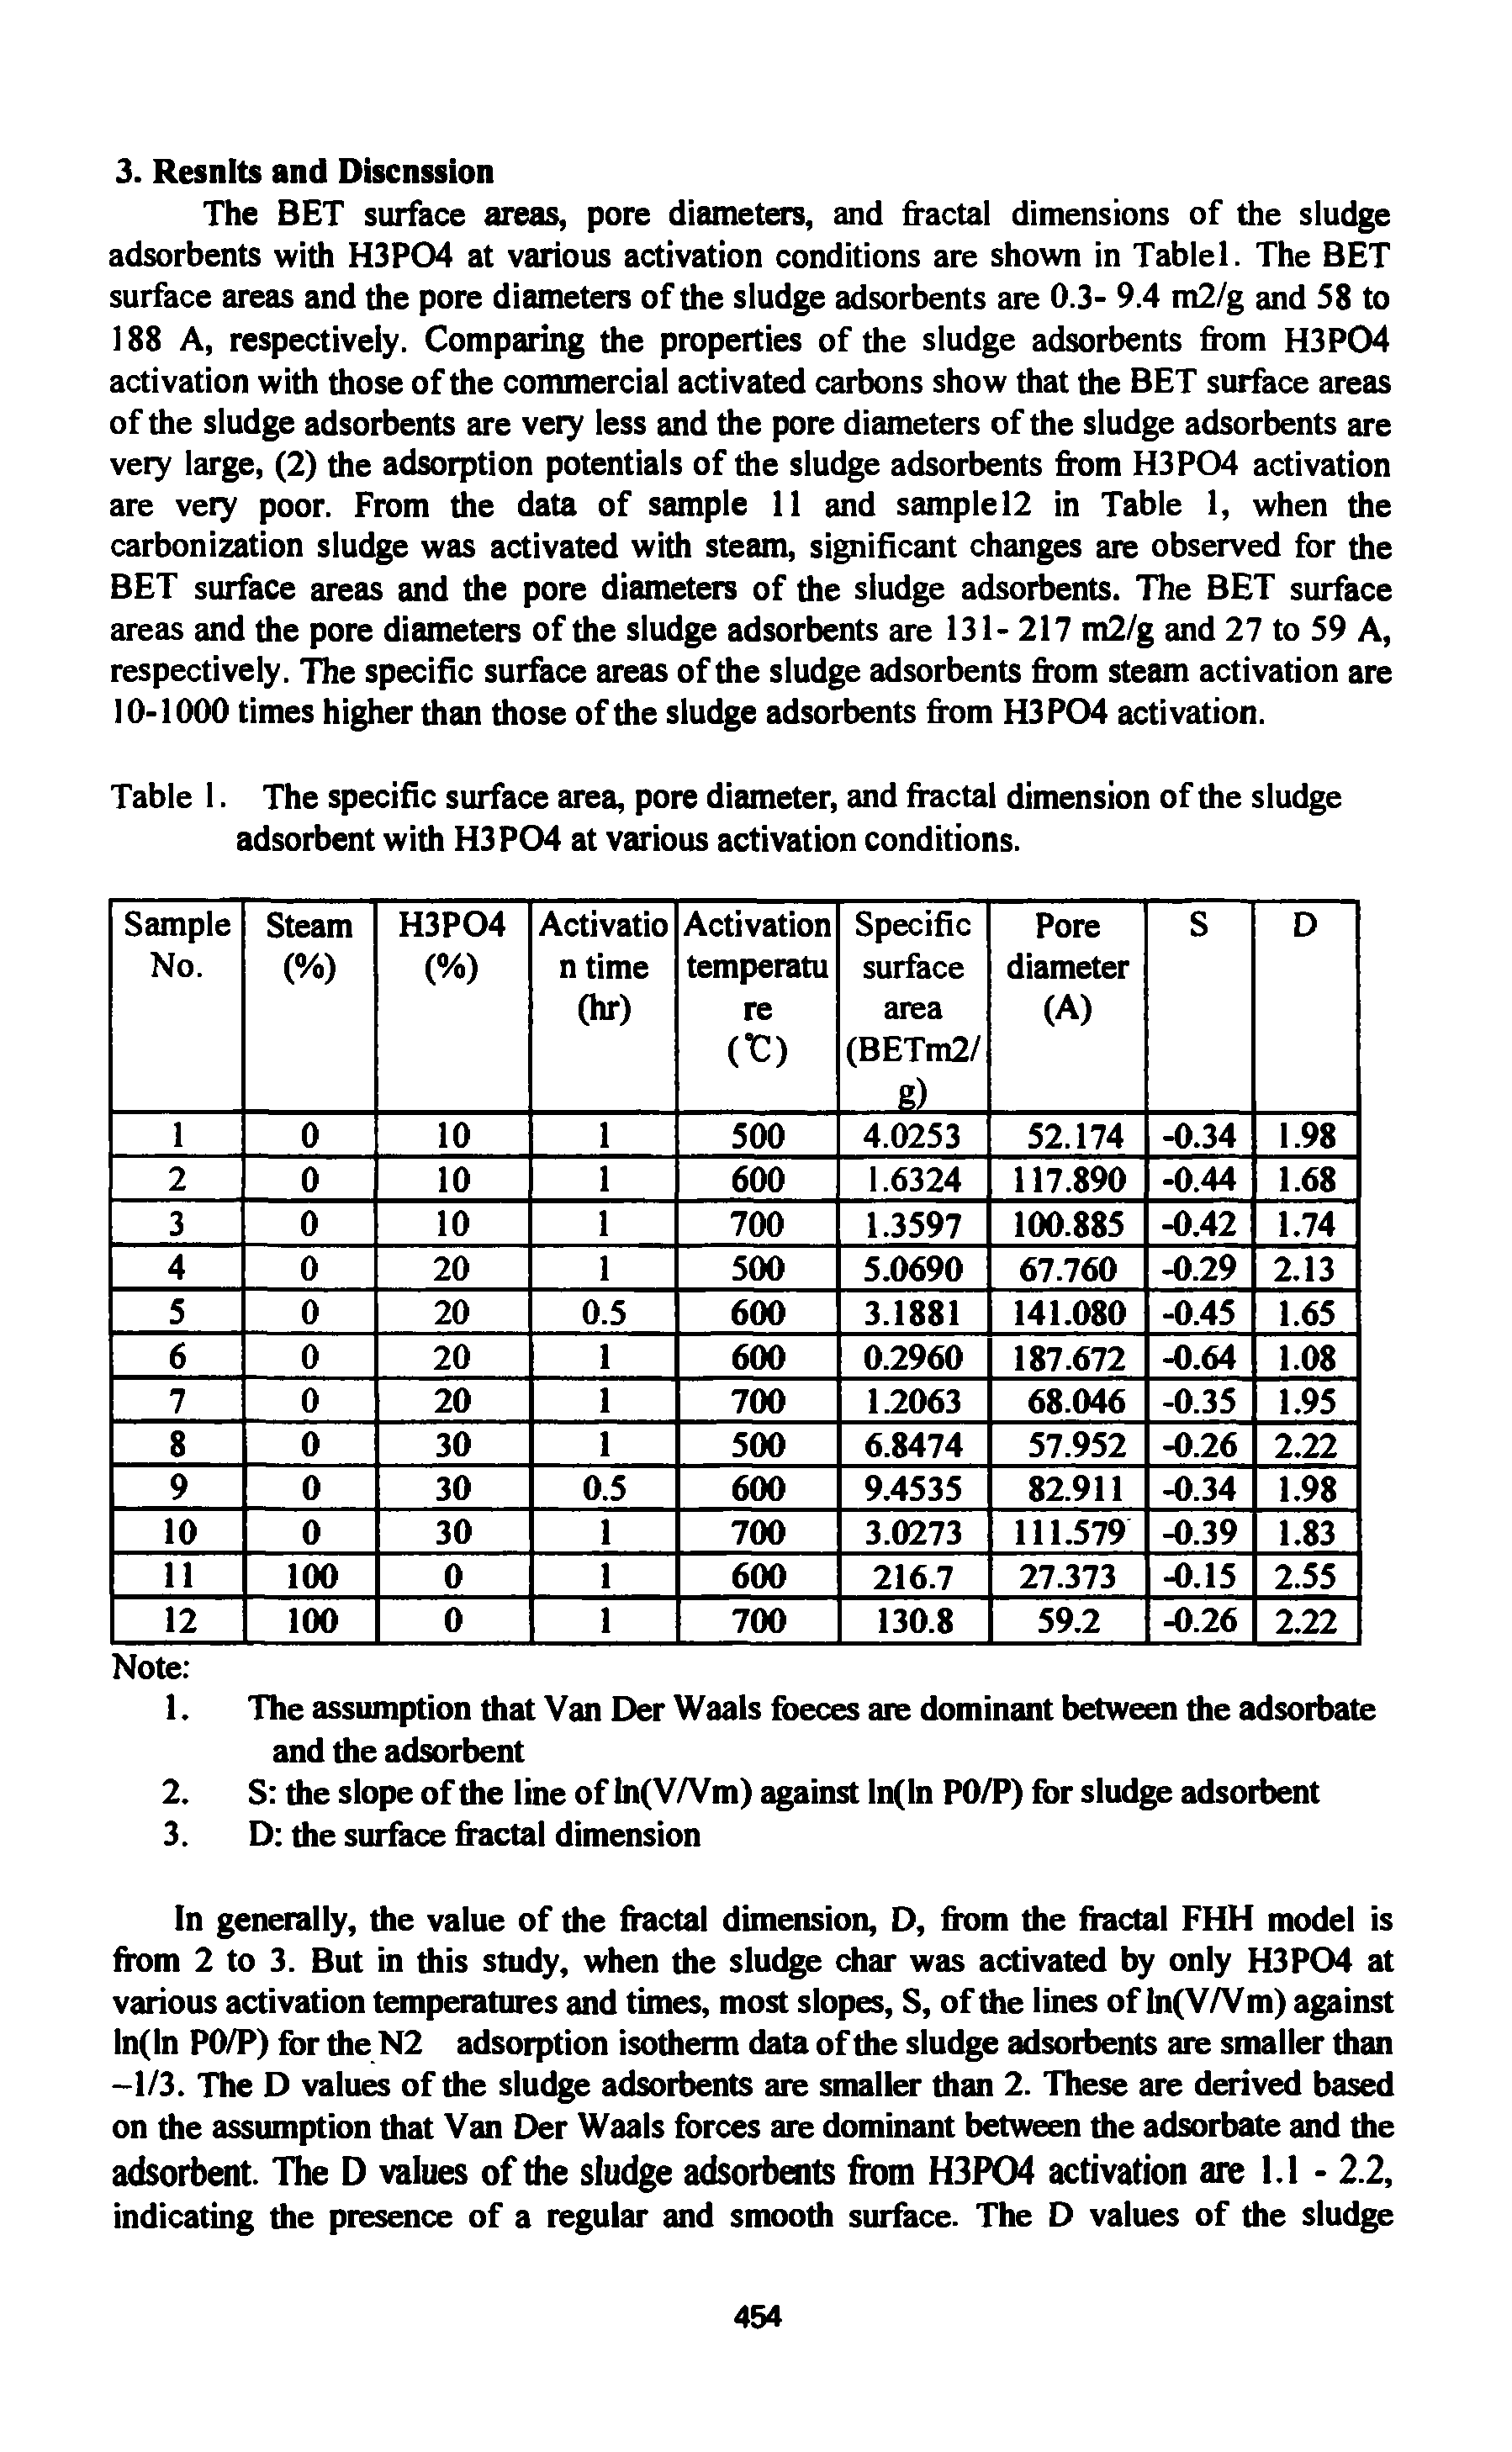 Table I. The specific surface area, pore diameter, and fractal dimension of the sludge adsorbent with H3P04 at various activation conditions.